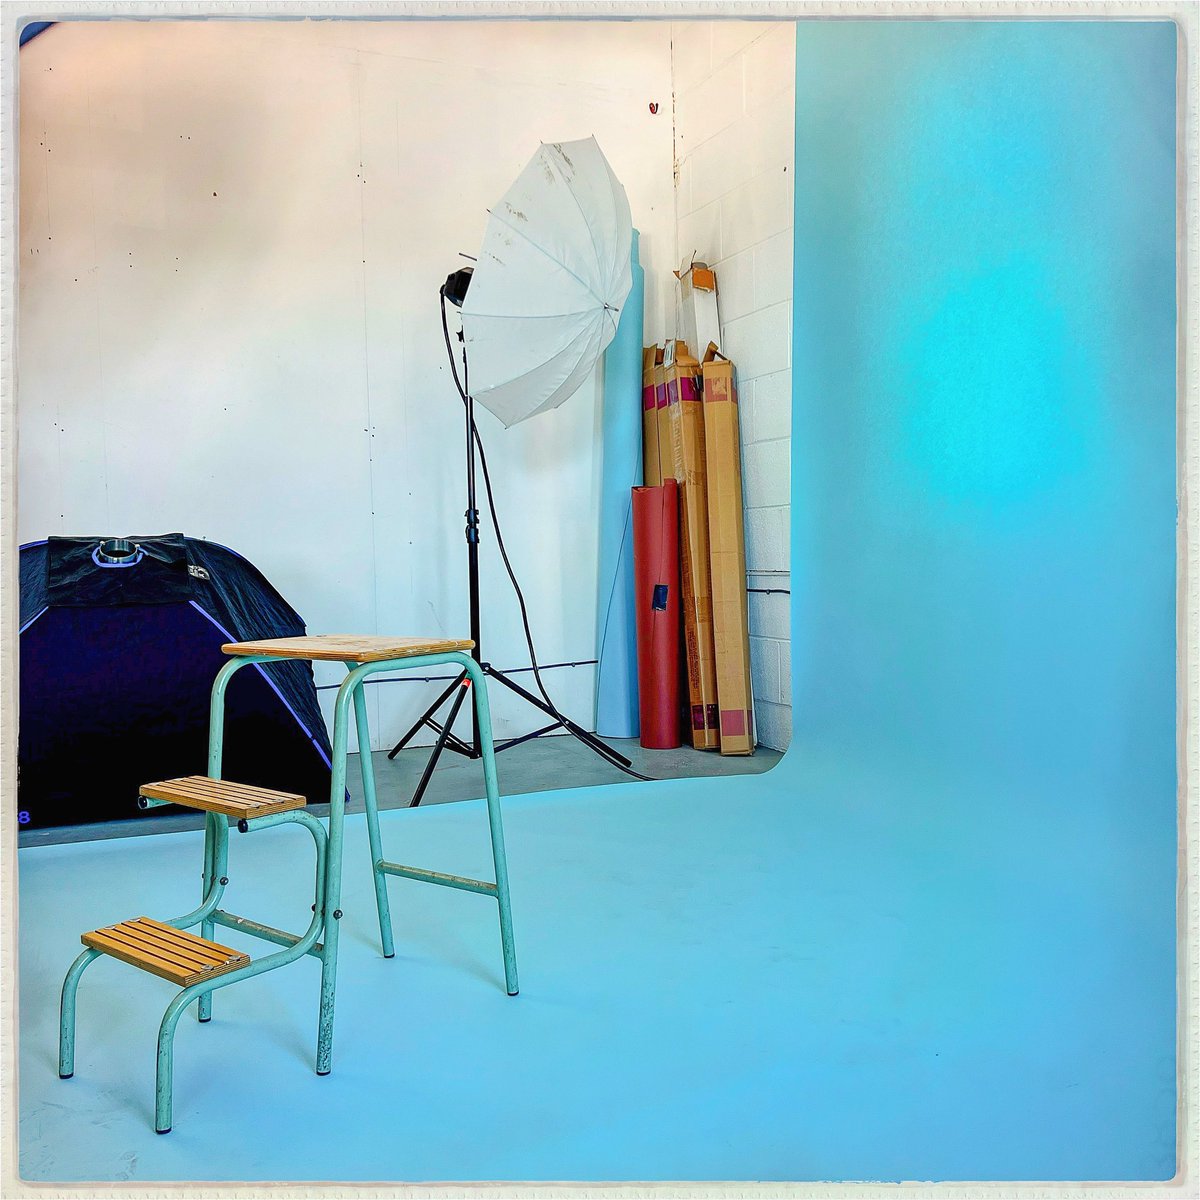 Day 111/366 #photoaday Spent a great day at @lenslableeds lighting workshop. There's always more to learn, particularly with flashlights and all those exposure numbers. I loved the blue backdrop, and I now want a stool like this. #photooftheday